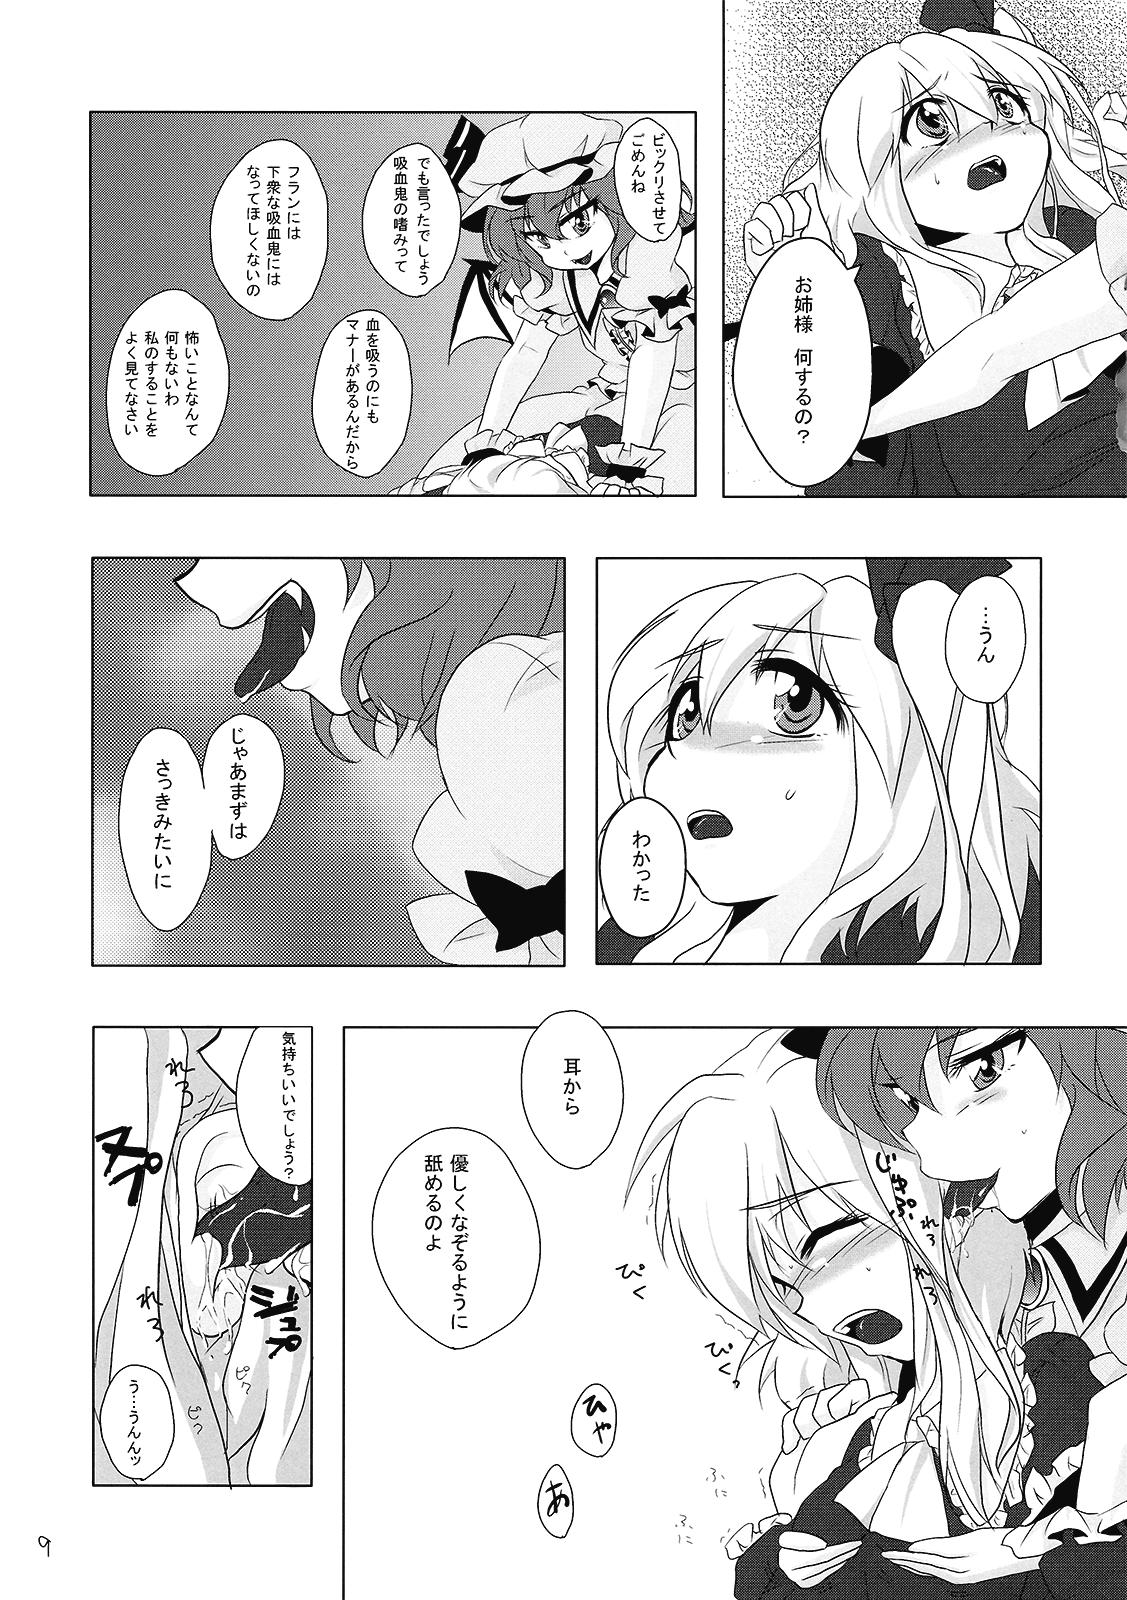 Camporn 吸血鬼のすゝめ - Touhou project Big Penis - Page 11